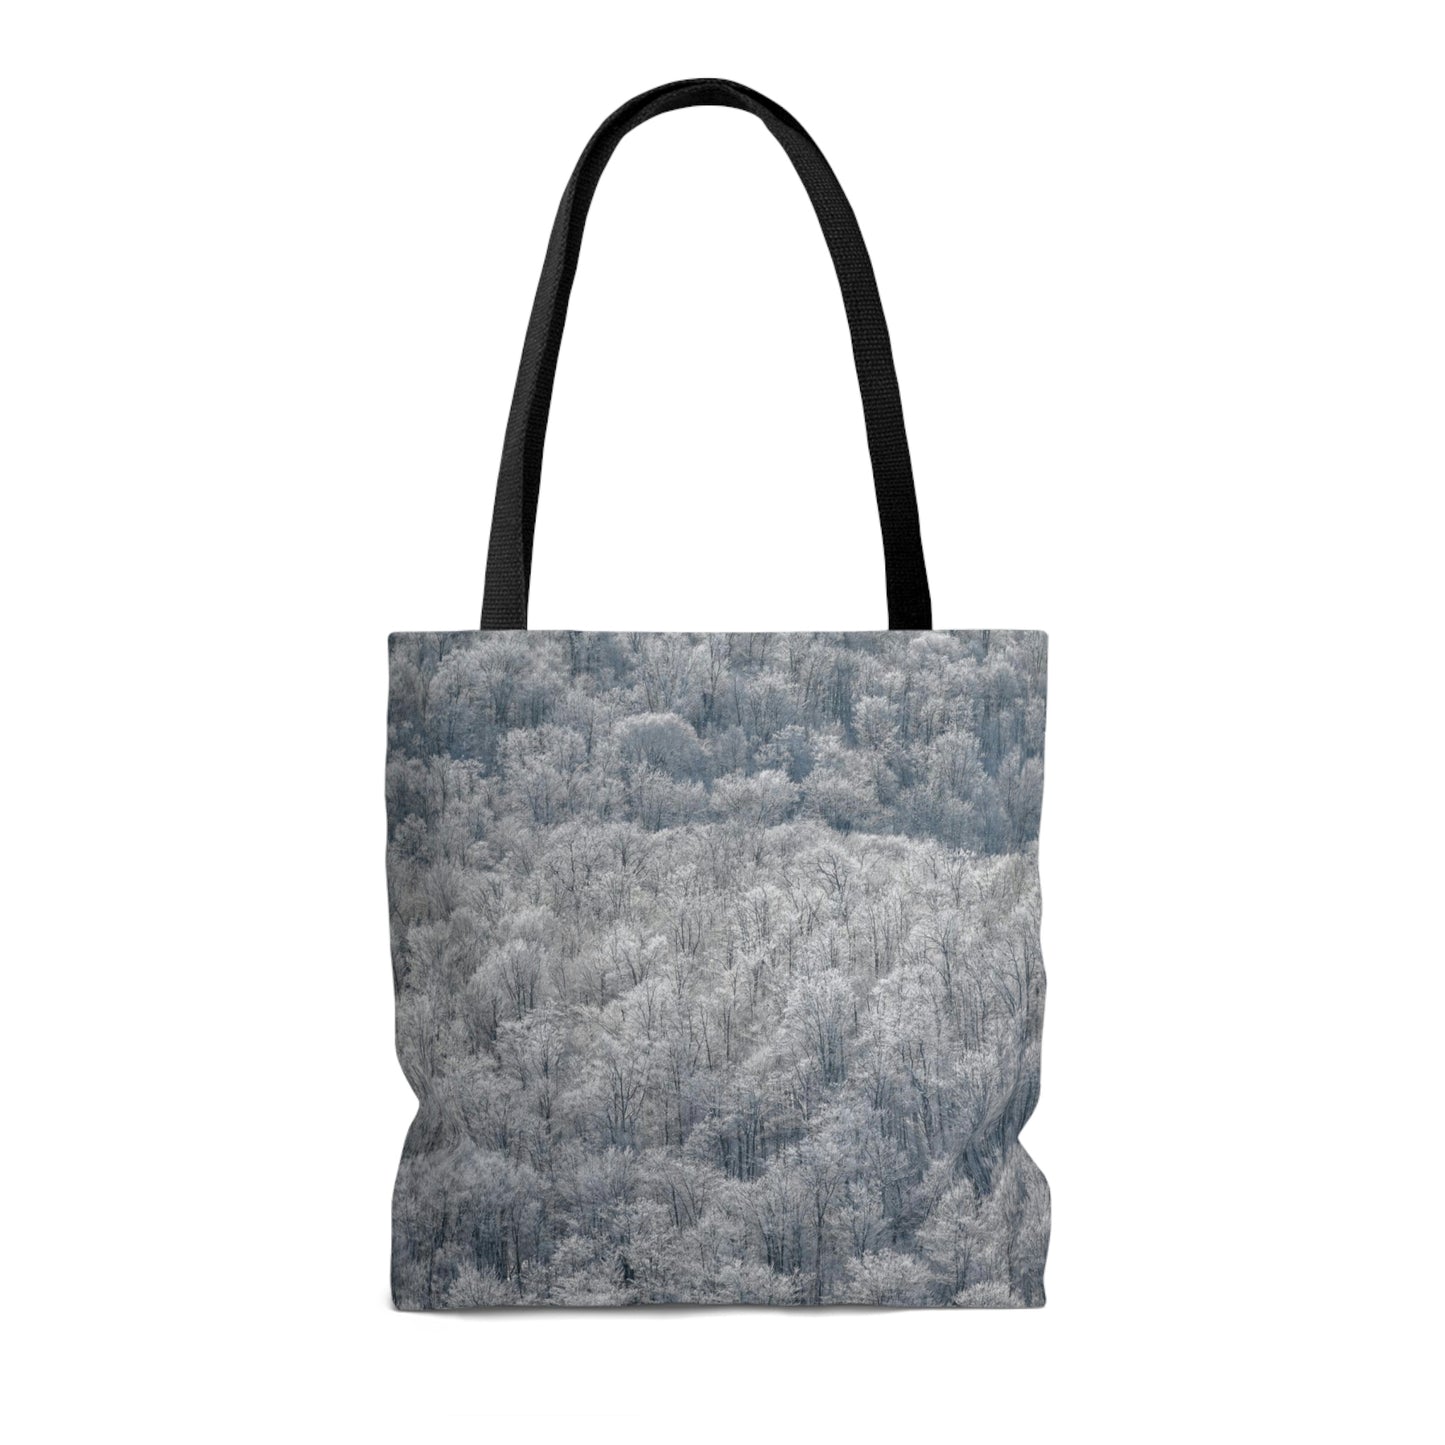 Tote Bag - Frozen trees